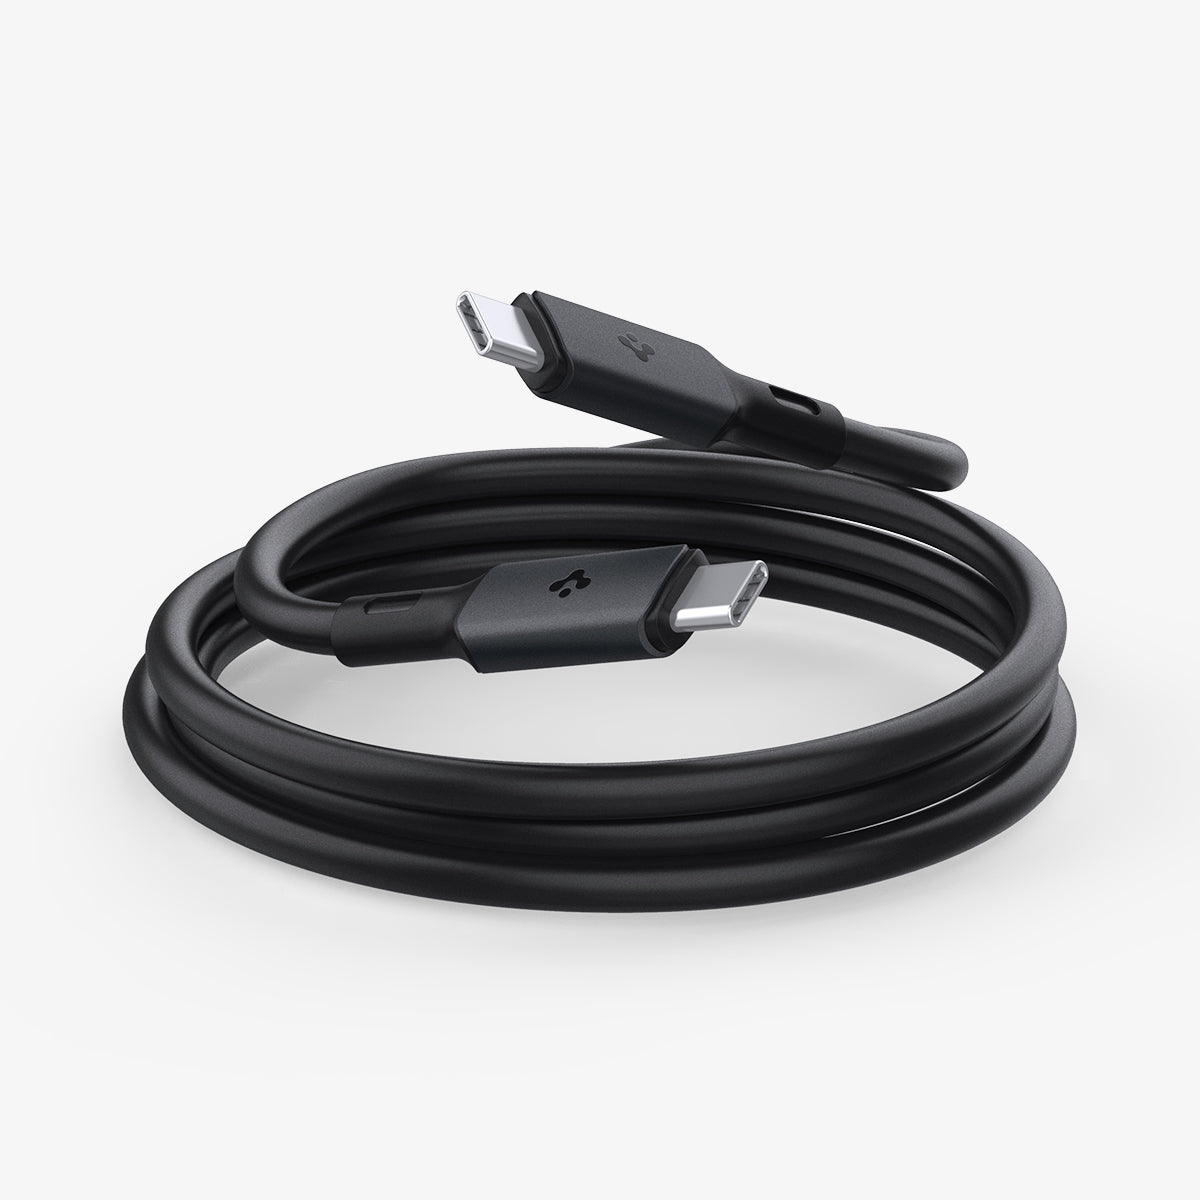 ACA06840 - ArcWire™ USB-C to USB-C Cable PB2203 in Black showing the 2 head pins of a charger cable rolled up for storage